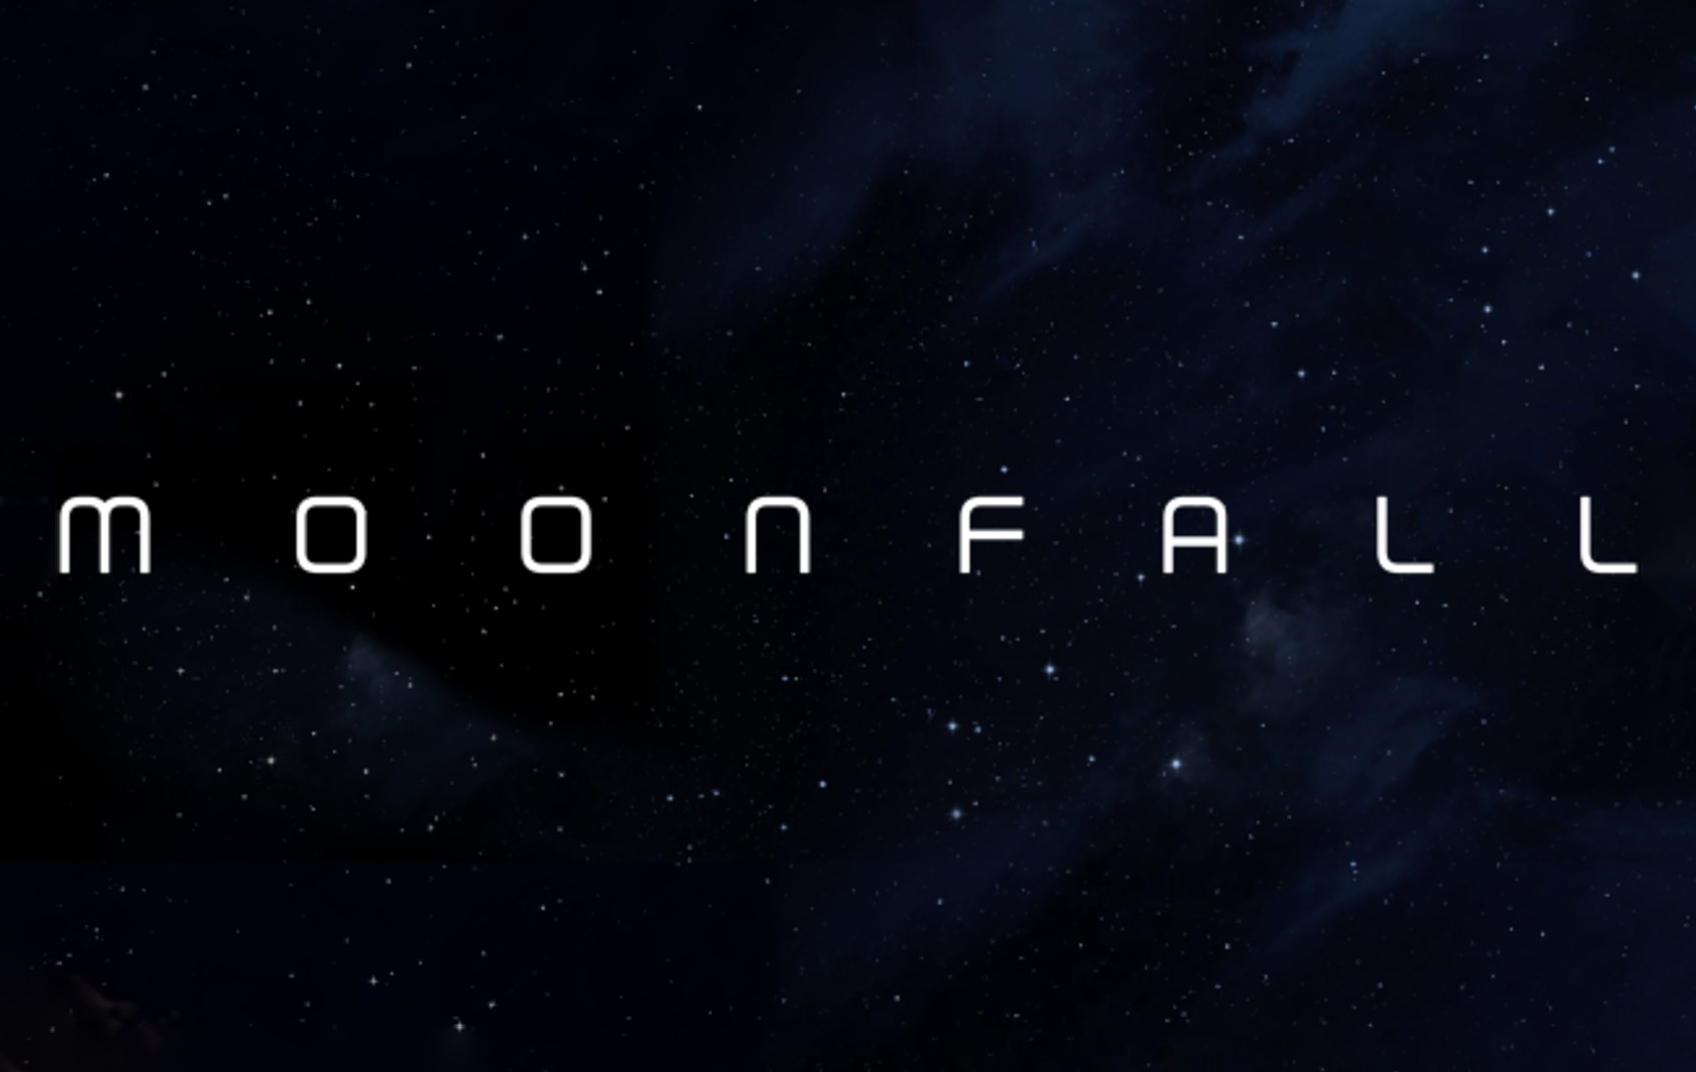 Roland Emmerich's 'Moonfall' asks what would happen if the Moon fell on Earth